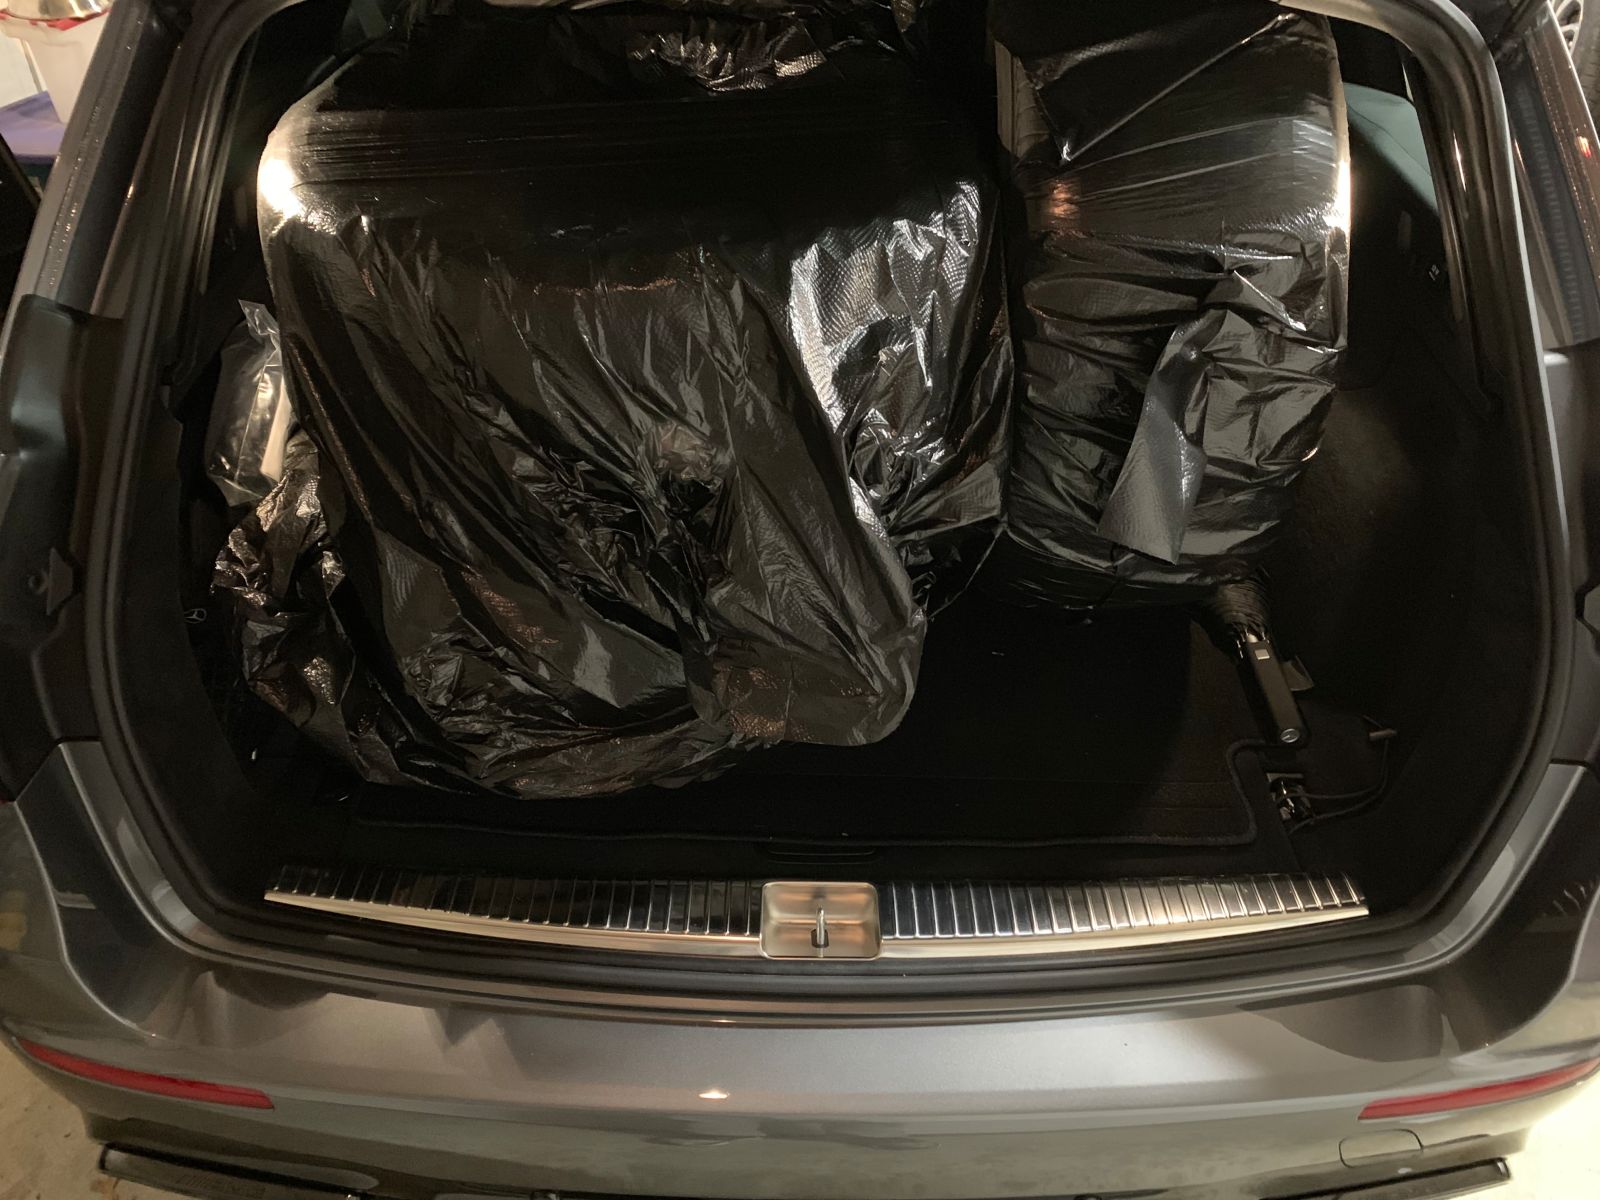 Illustration for article titled Random fact: Four 20-inch winter tires fit in the cargo area of a 2018 E-class wagon.